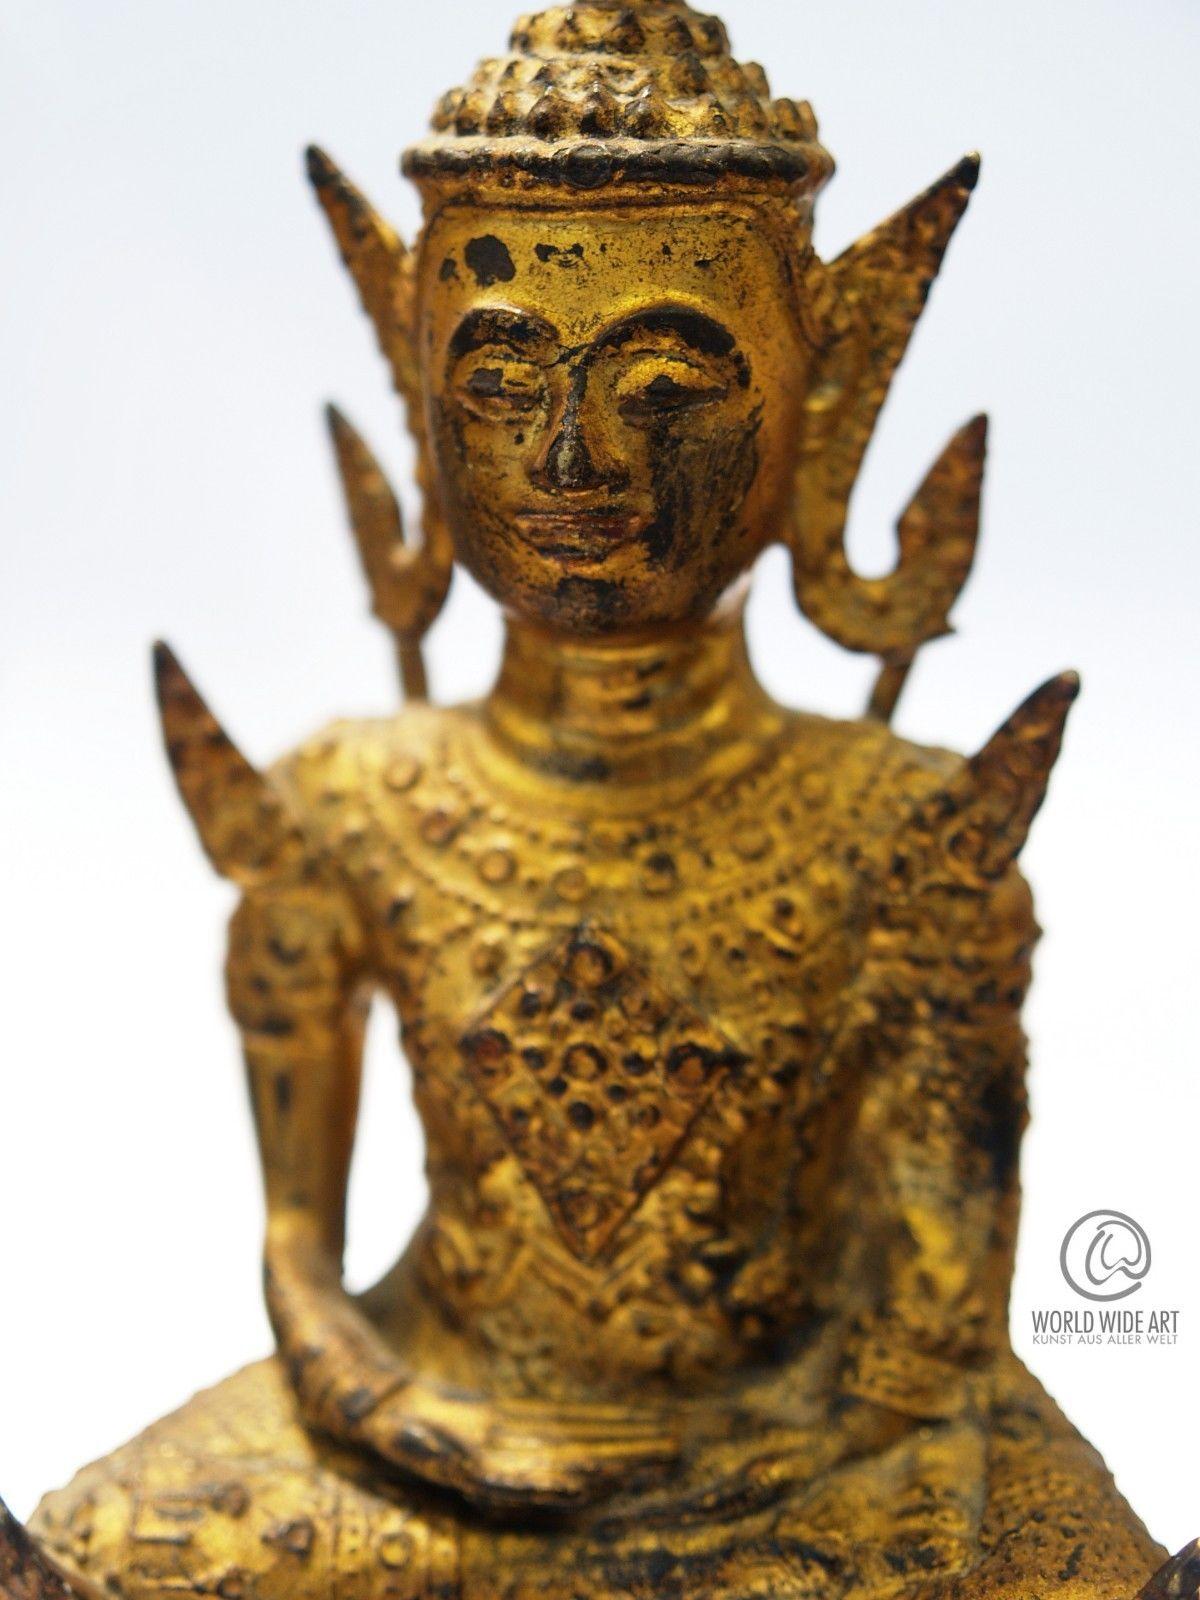 EXCEPTIONAL ANTIQUE BUDDHA, BURMA, EARLY 19th CENTURY, GILDED BRONZE - Art by Unknown